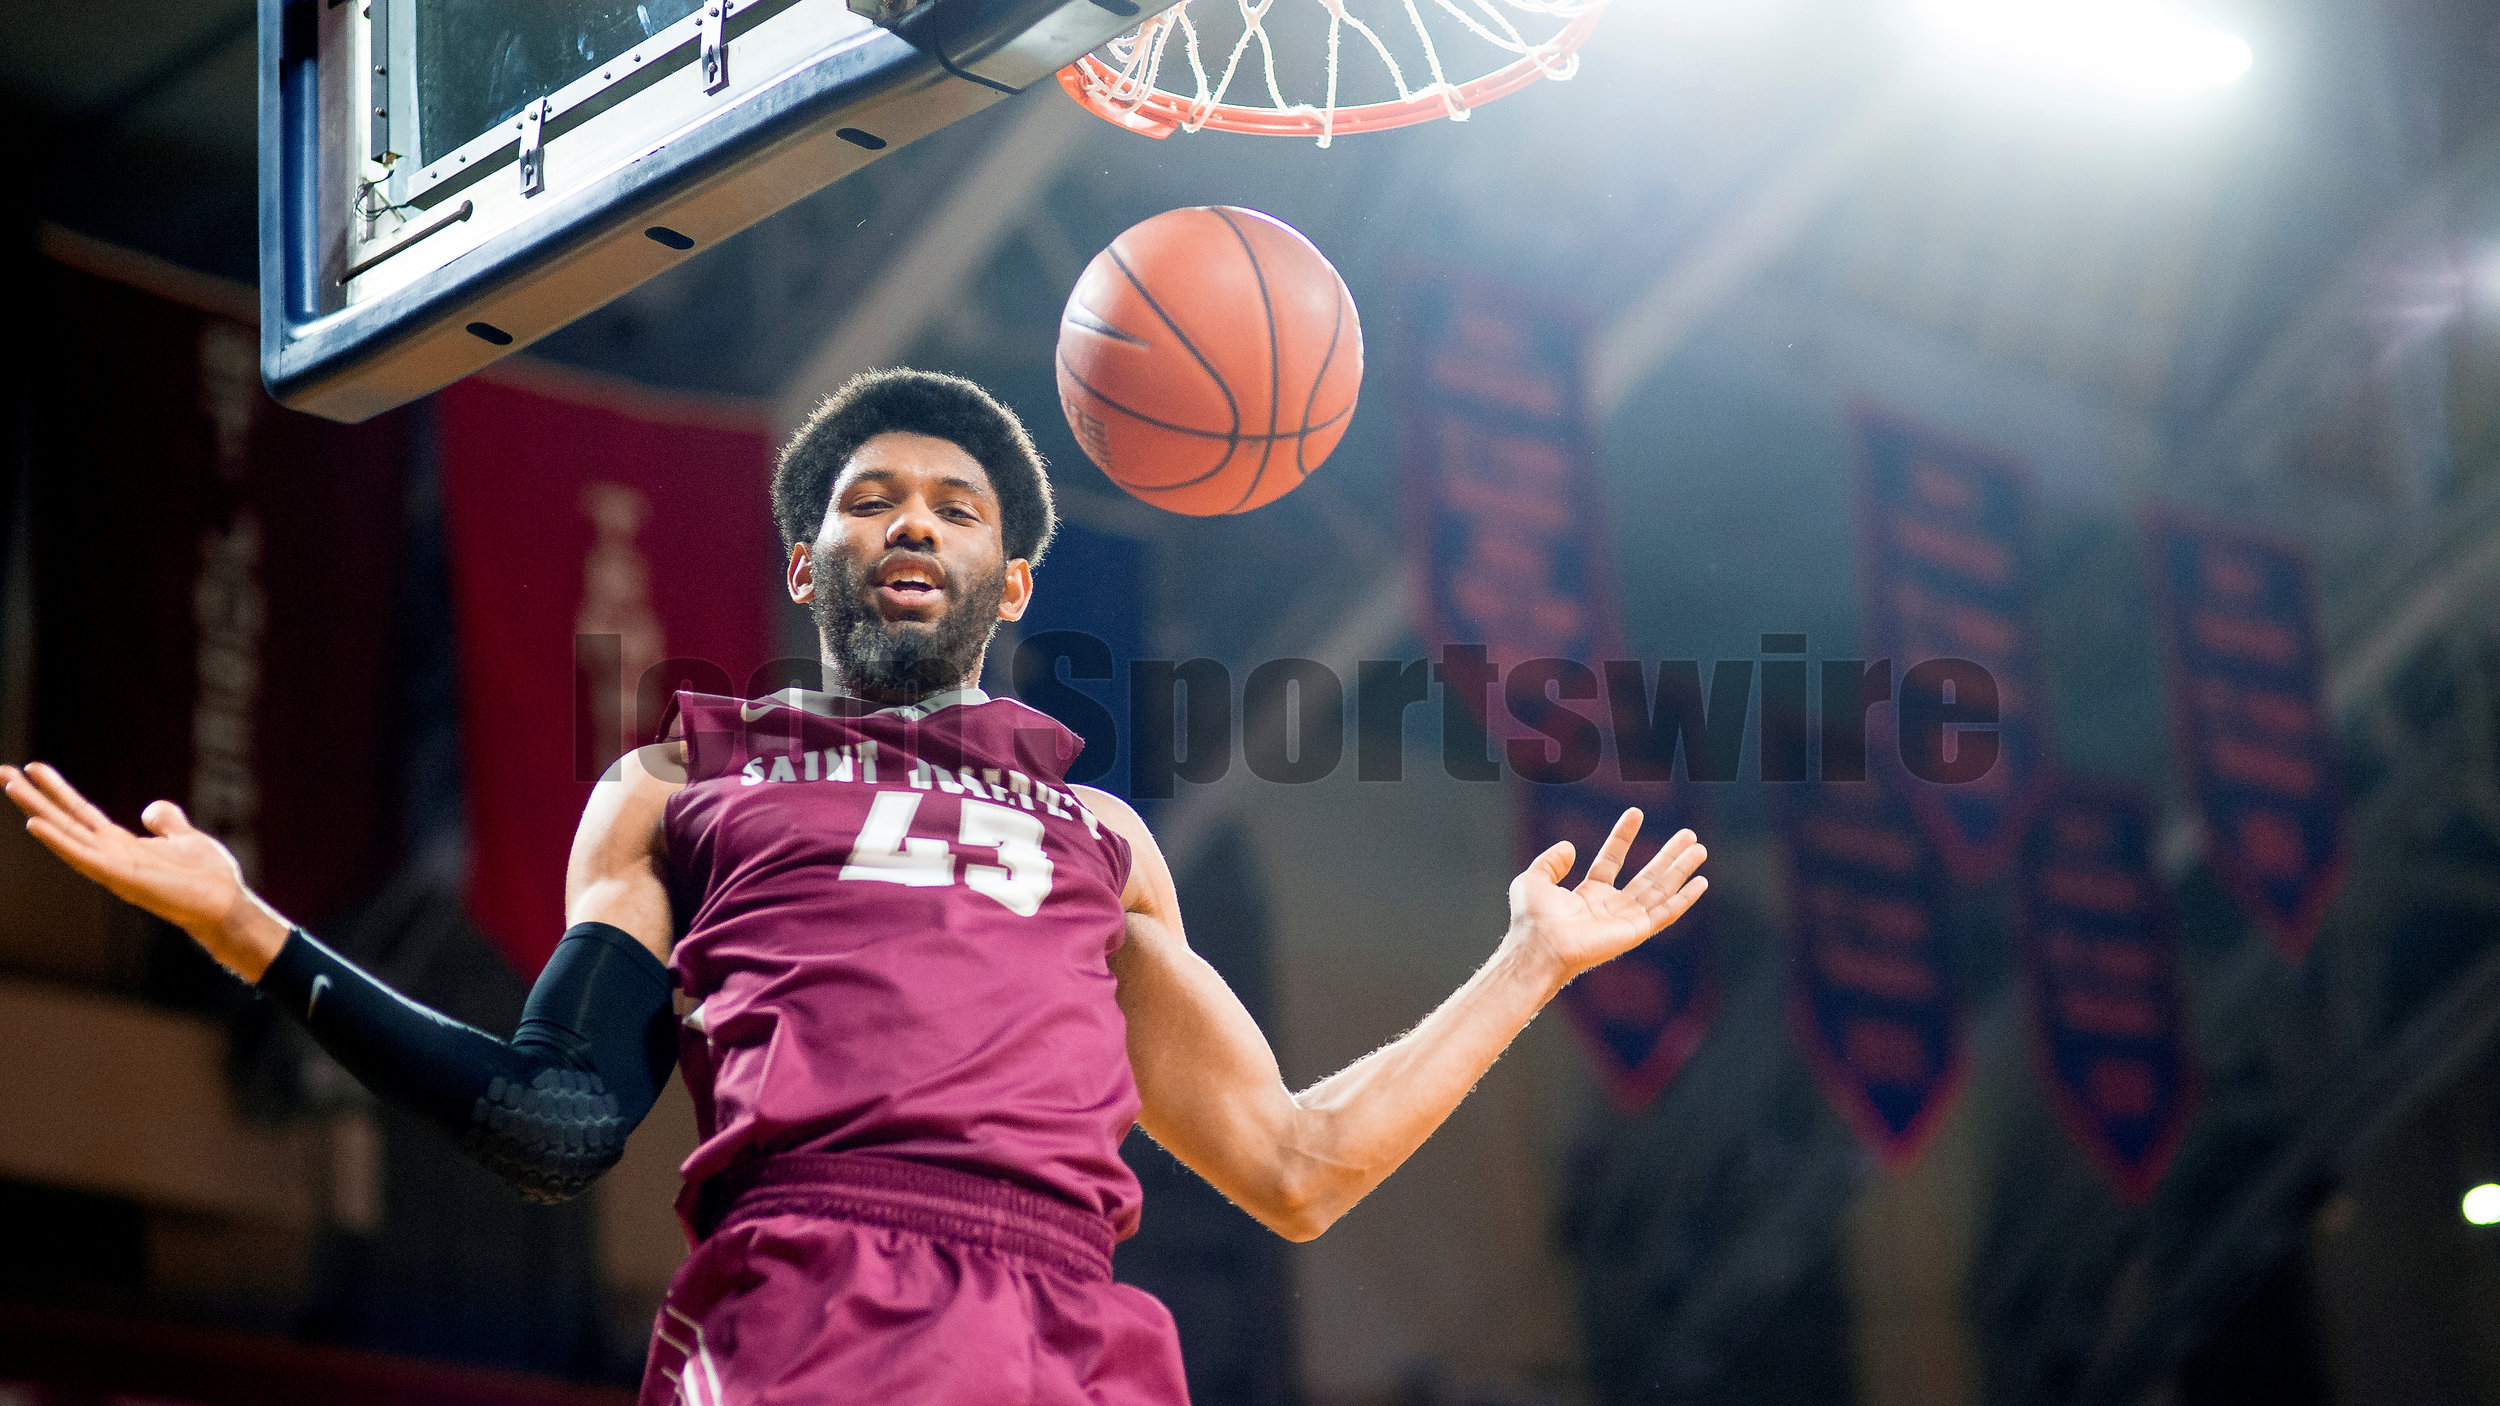  20 January 2016: Saint Joseph's Hawks forward DeAndre Bembry (43) poses after his dunk on the way down from the basket during the NCAA Men's basketball game between the Penn Quakers and the Saint Joseph's Hawks played at the Palestra in Philadelphia